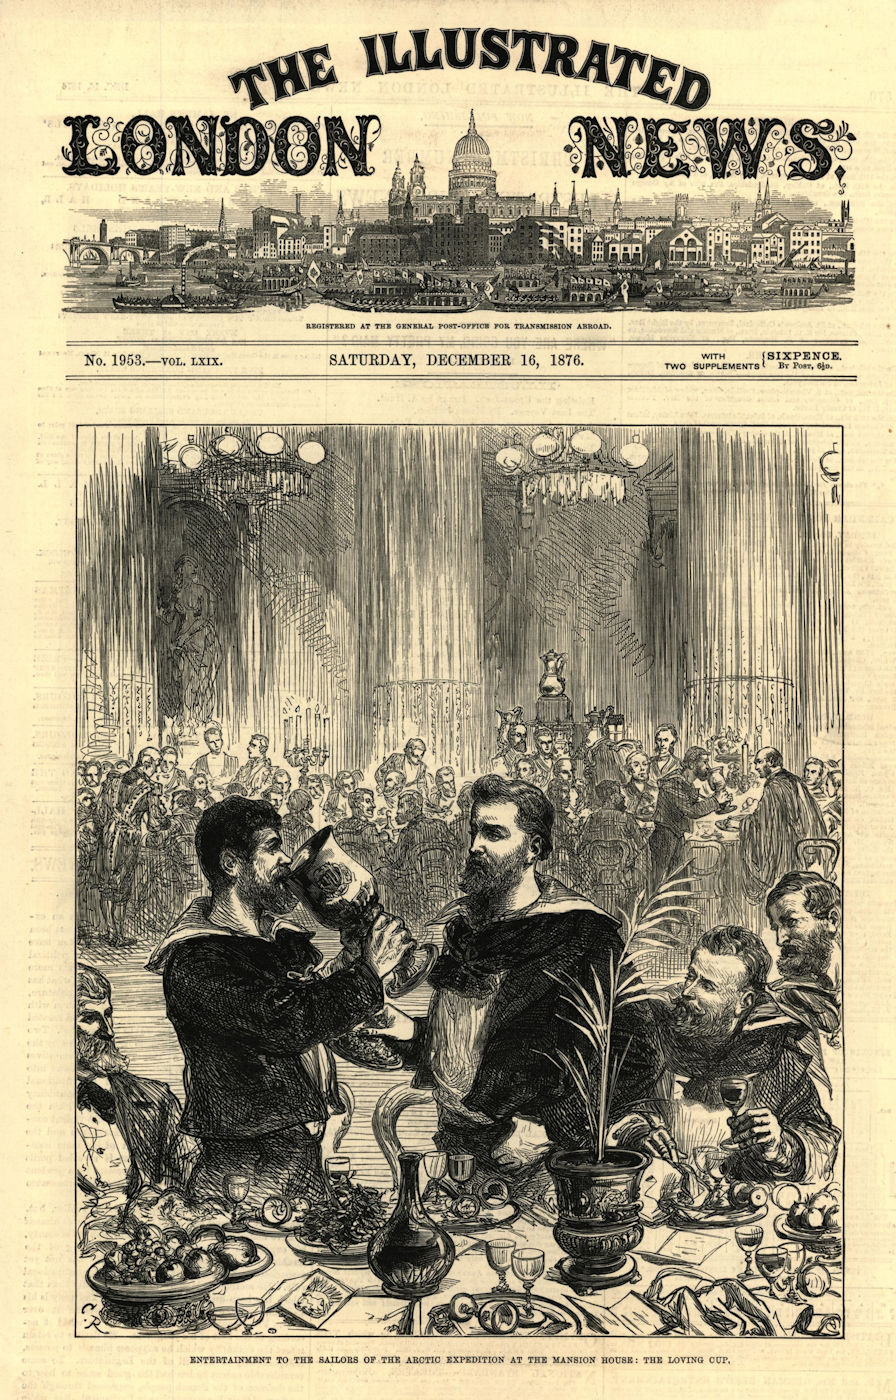 Associate Product Entertainment to the sailors of the Arctic Expedition at the Mansion House 1876